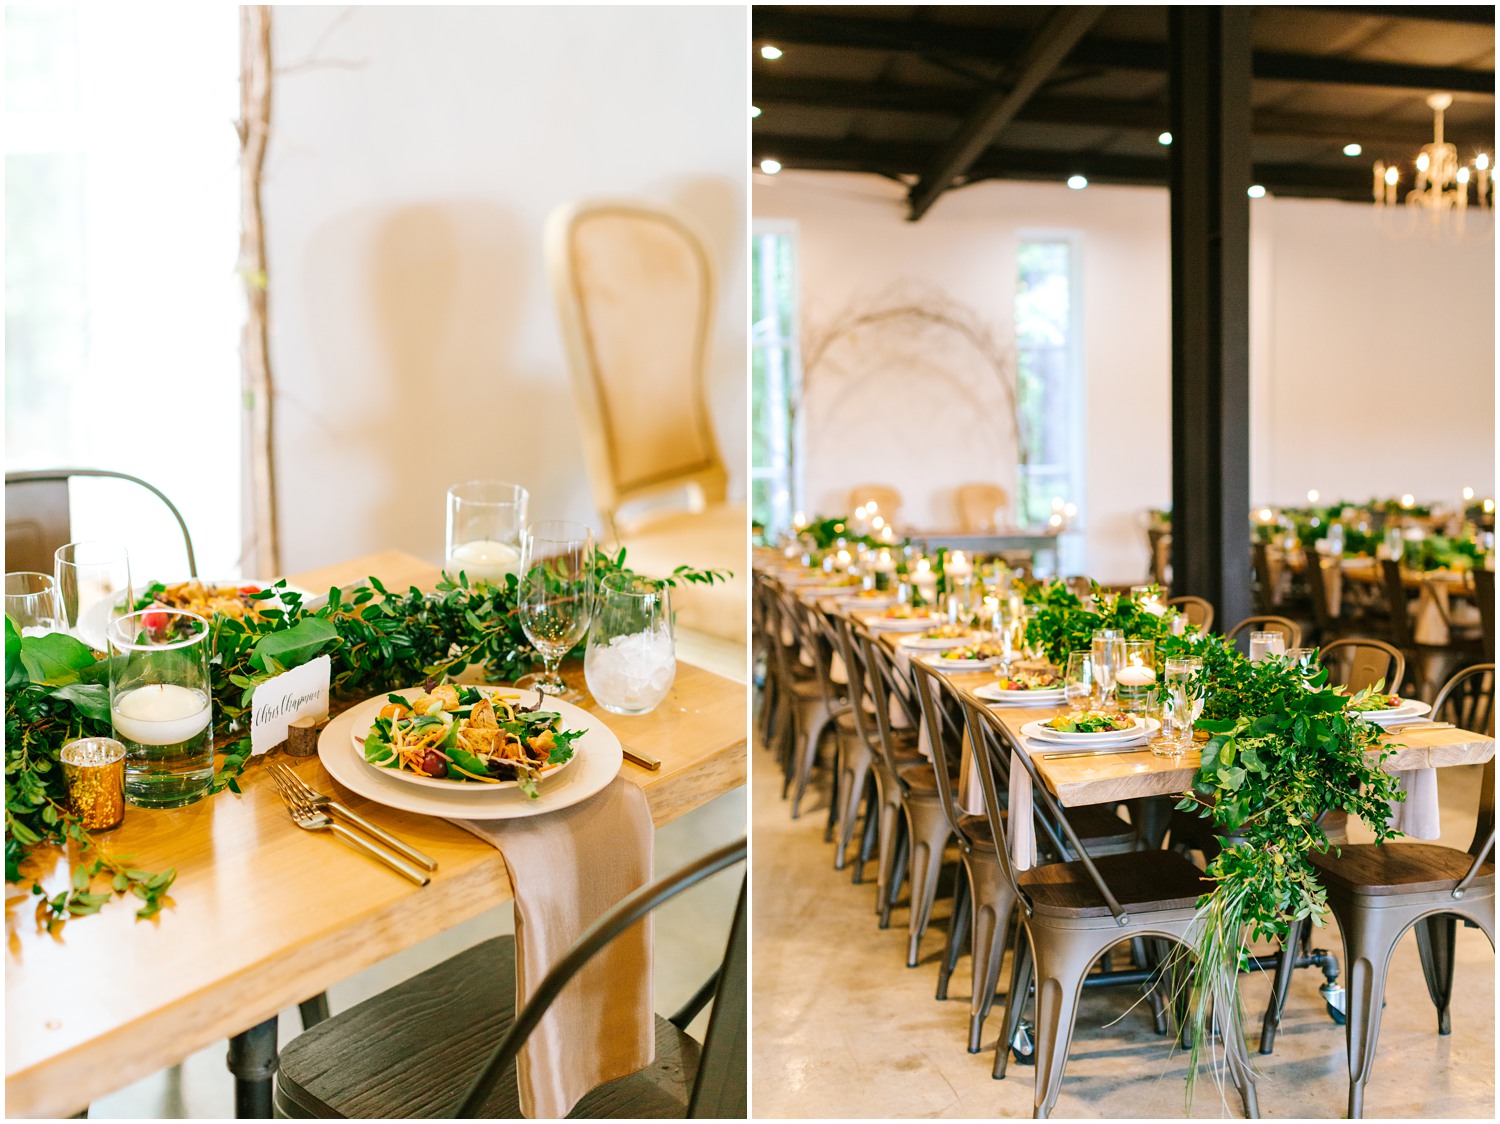 Raleigh NC wedding reception details with greenery draped along table